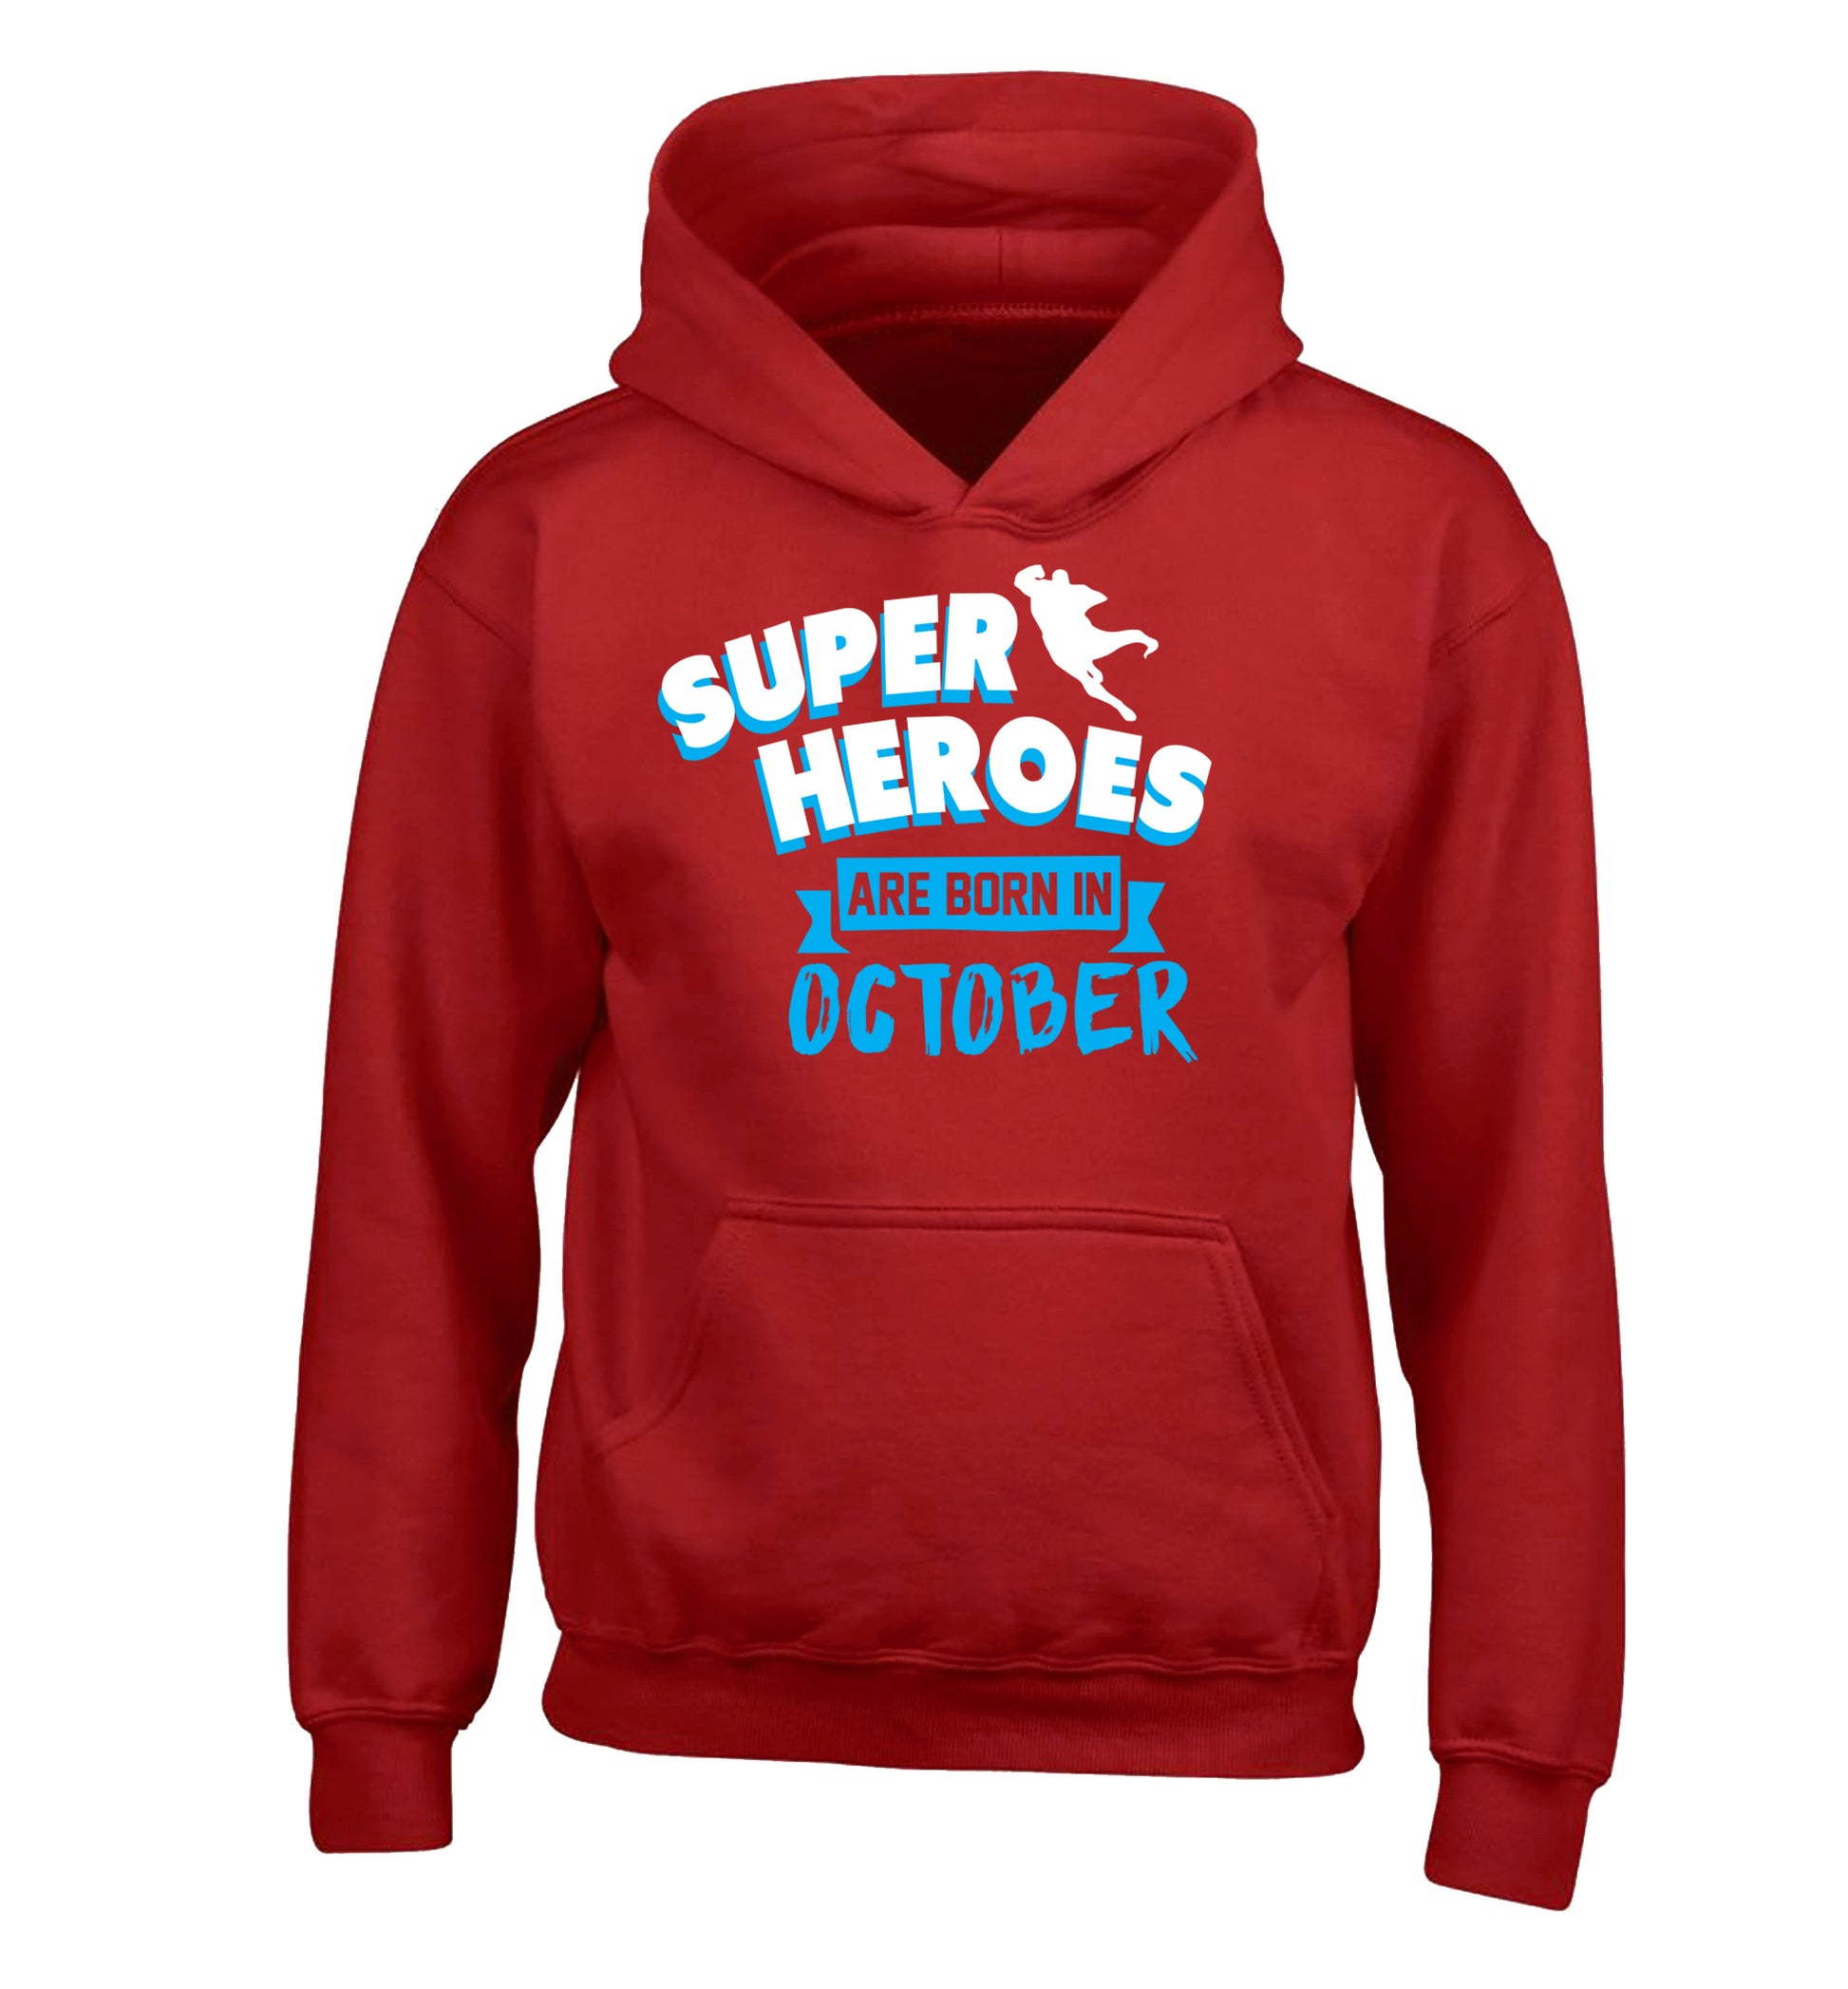 Superheroes are born in October children's red hoodie 12-13 Years